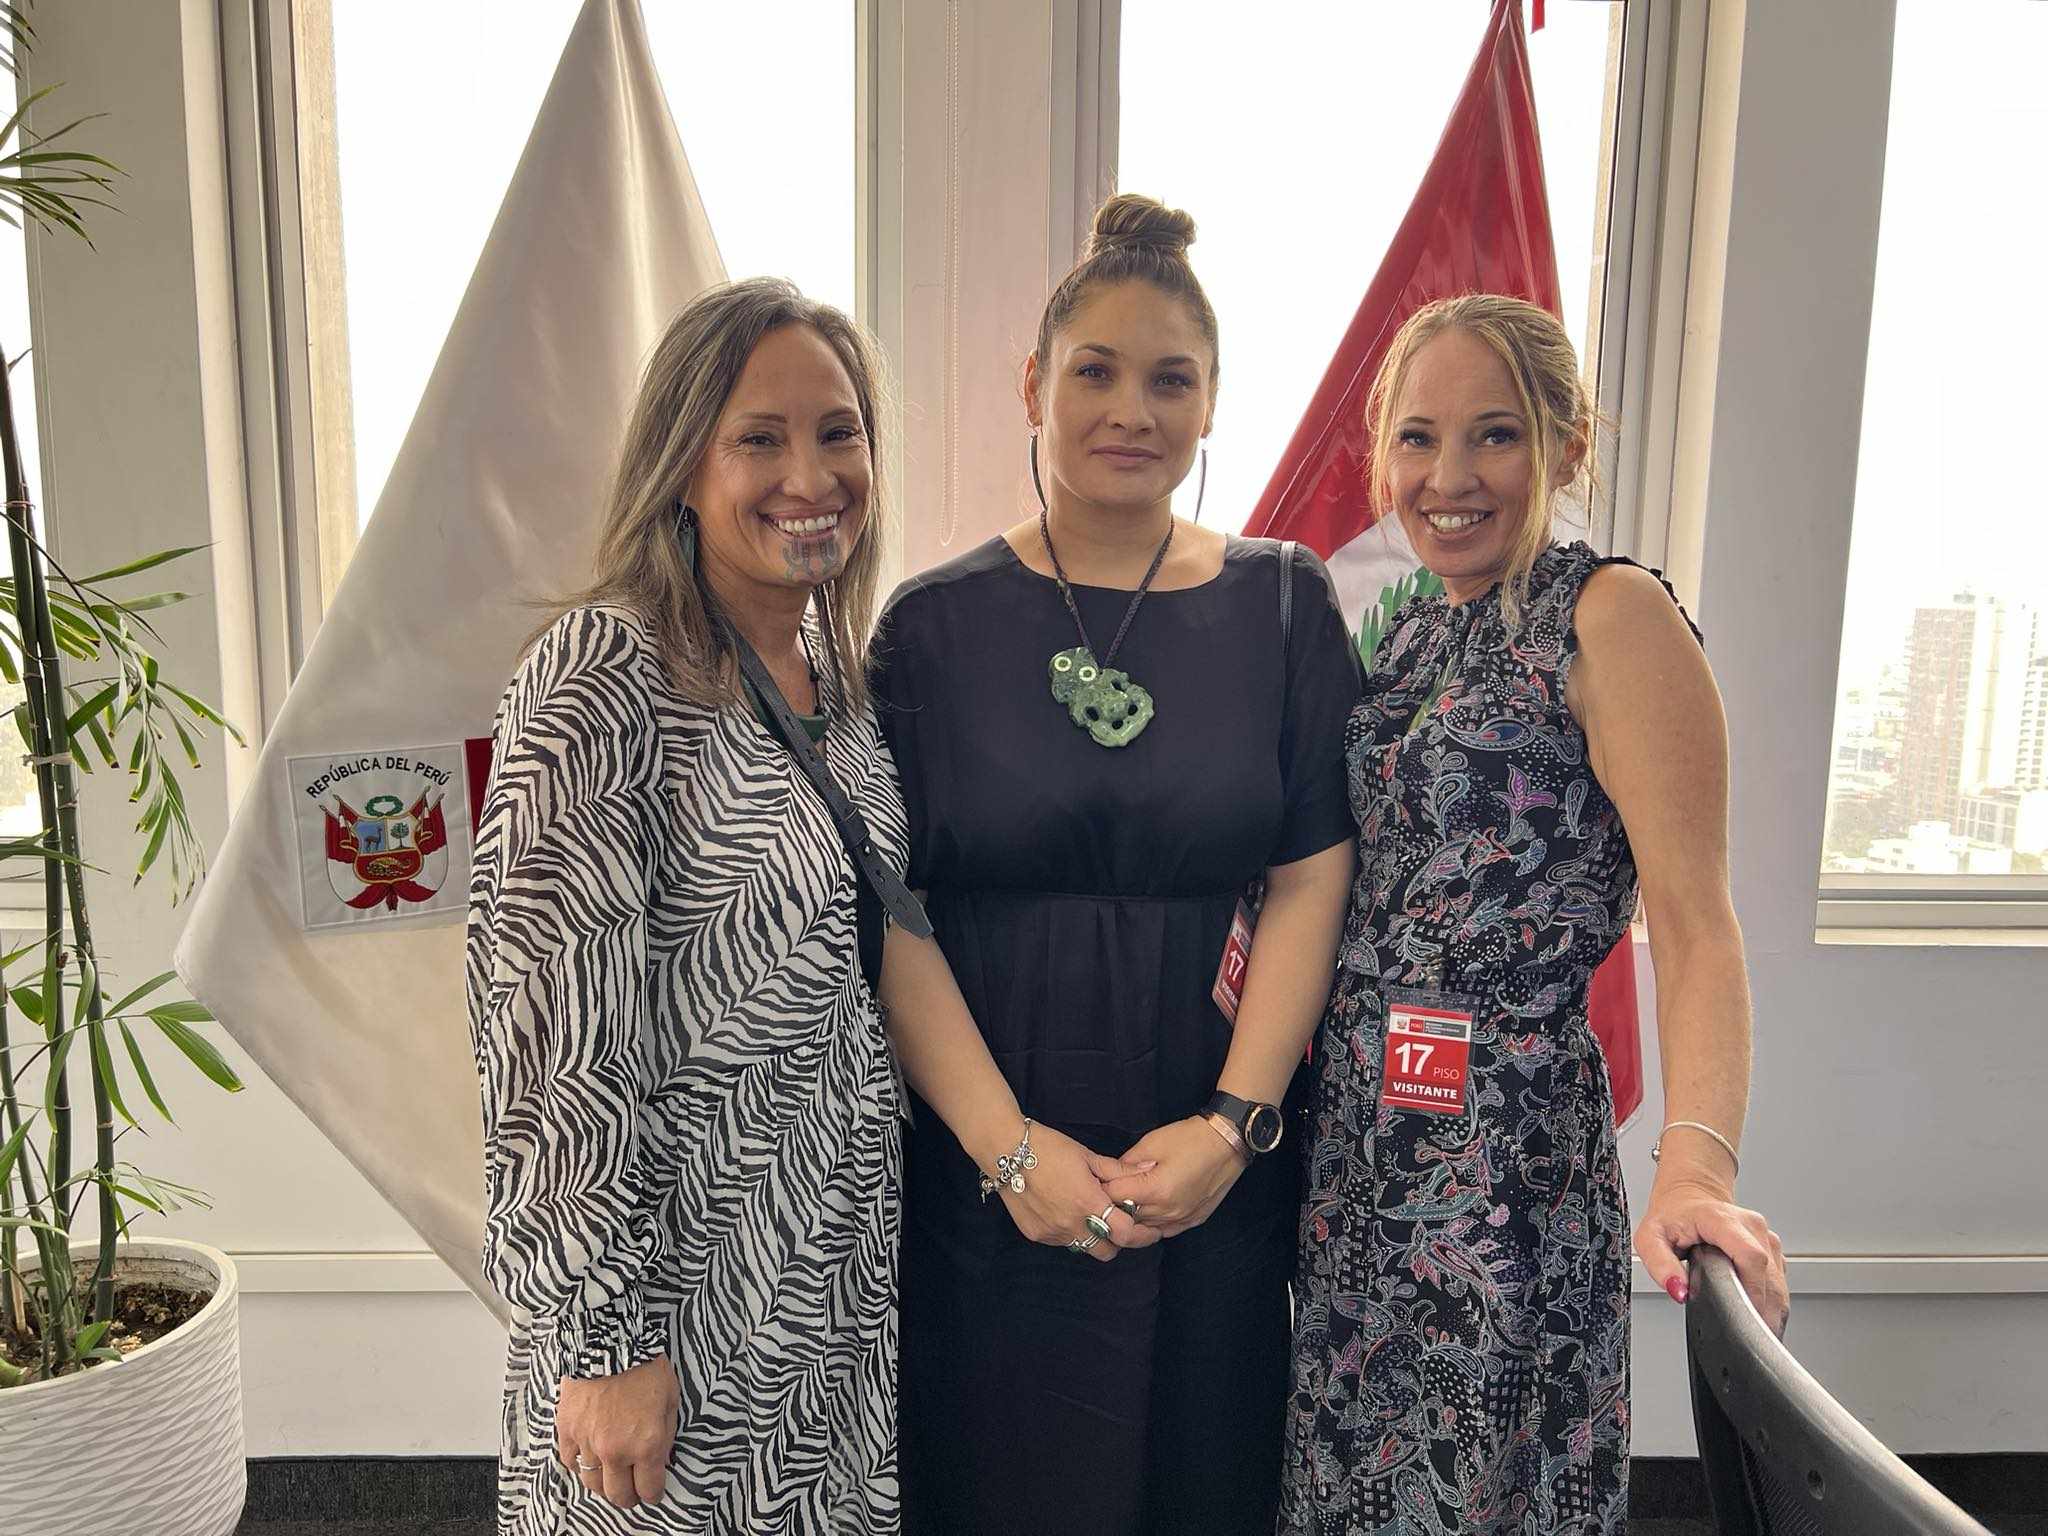 A delegation of three accomplished Māori academics, Kelly Klink, Jen Crown, and Carla Klink, is voyaged to Peru to reinforce indigenous bonds and rewrite a shared history that transcends colonized boundaries.